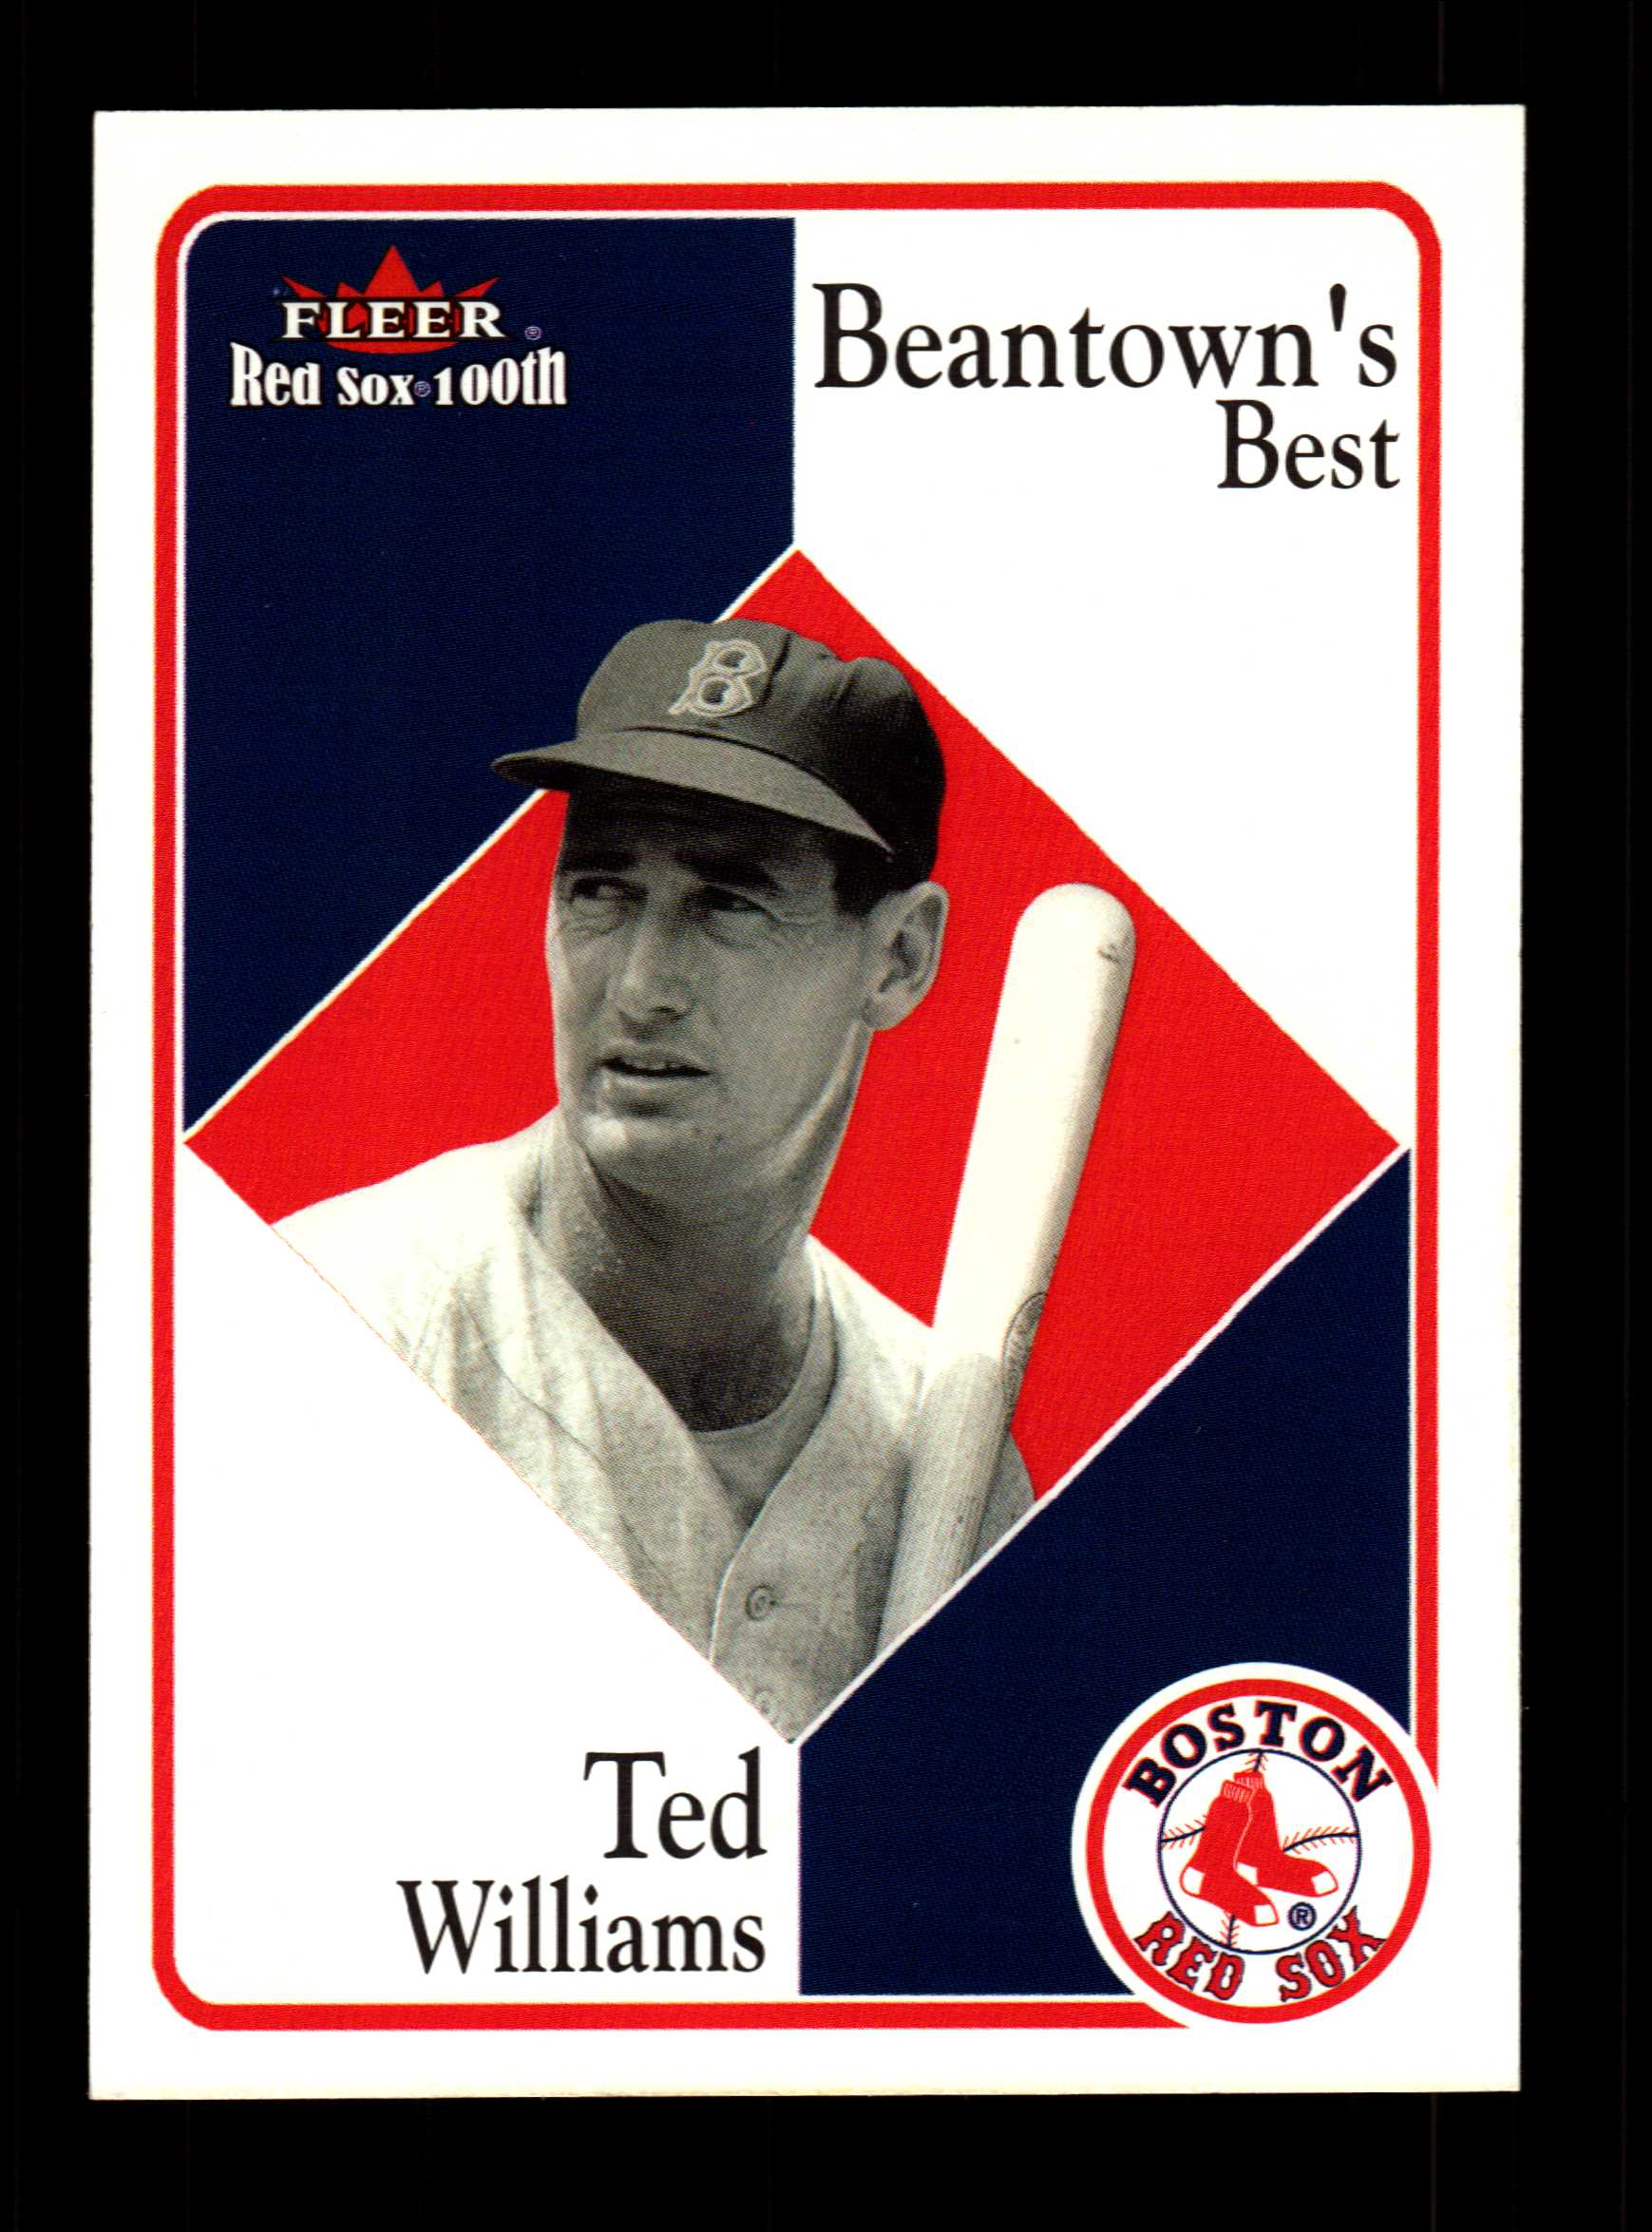 2001 Fleer Red Sox 100th #84 Ted Williams BB